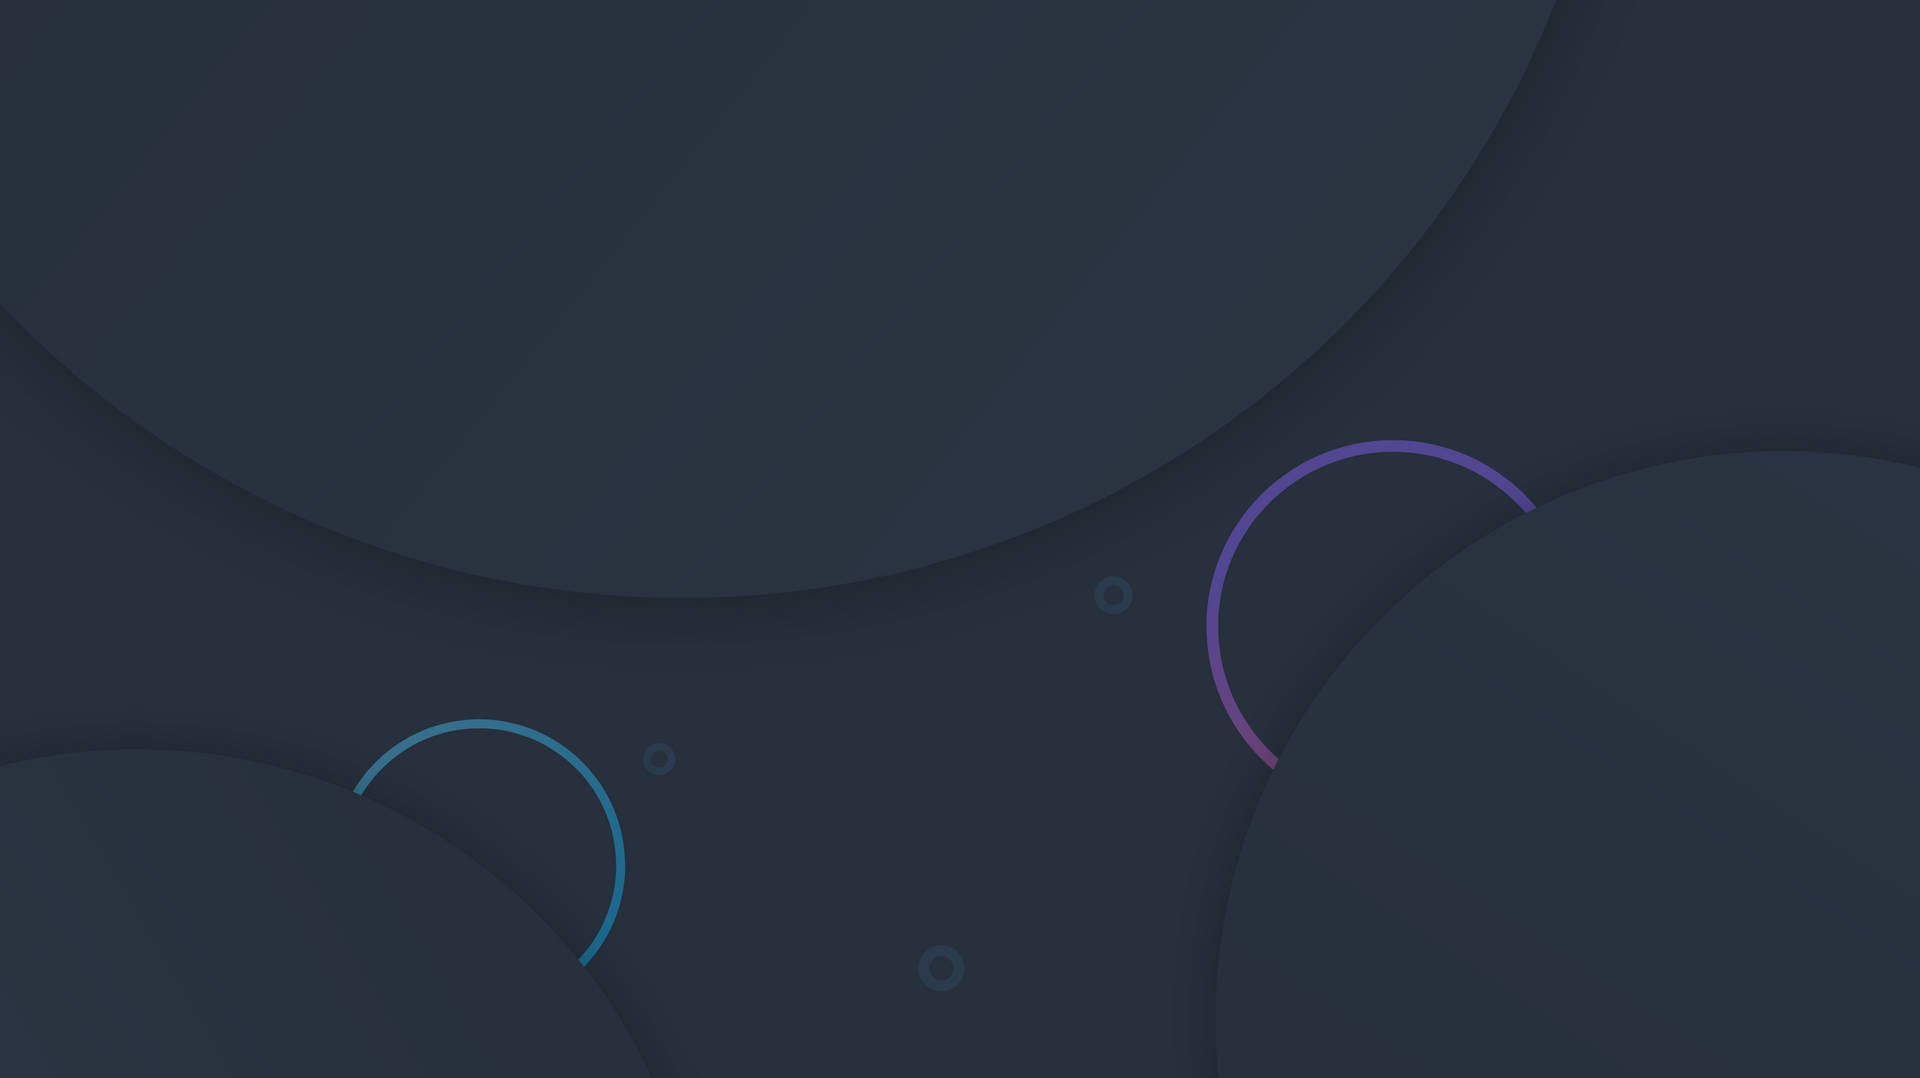 Dark Theme Glowing Abstract Circles Background